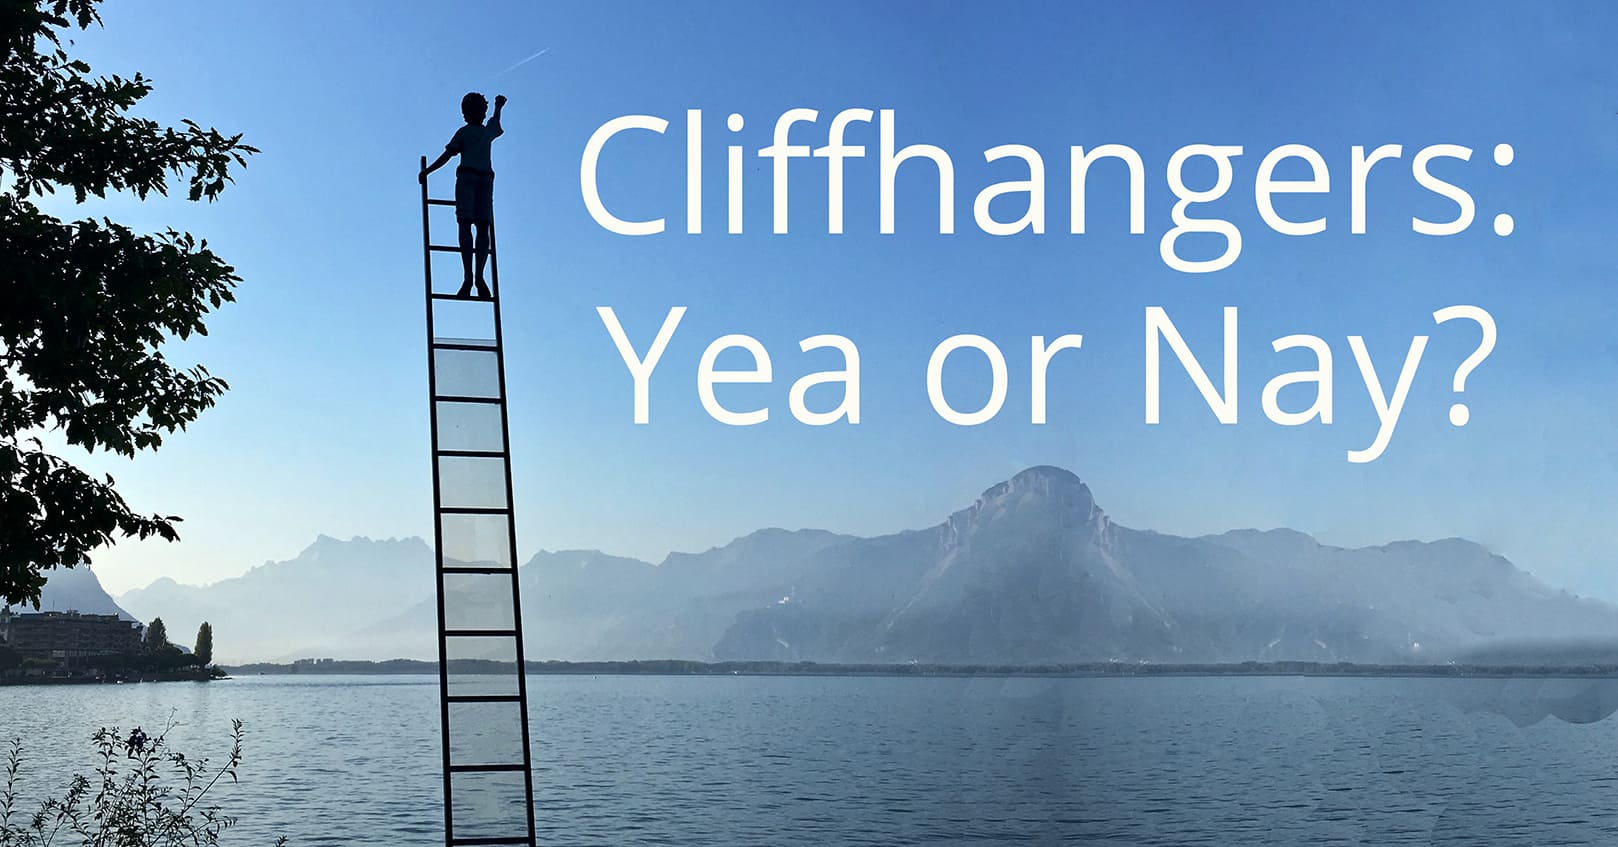 Cliffhangers: Yea or Nay?